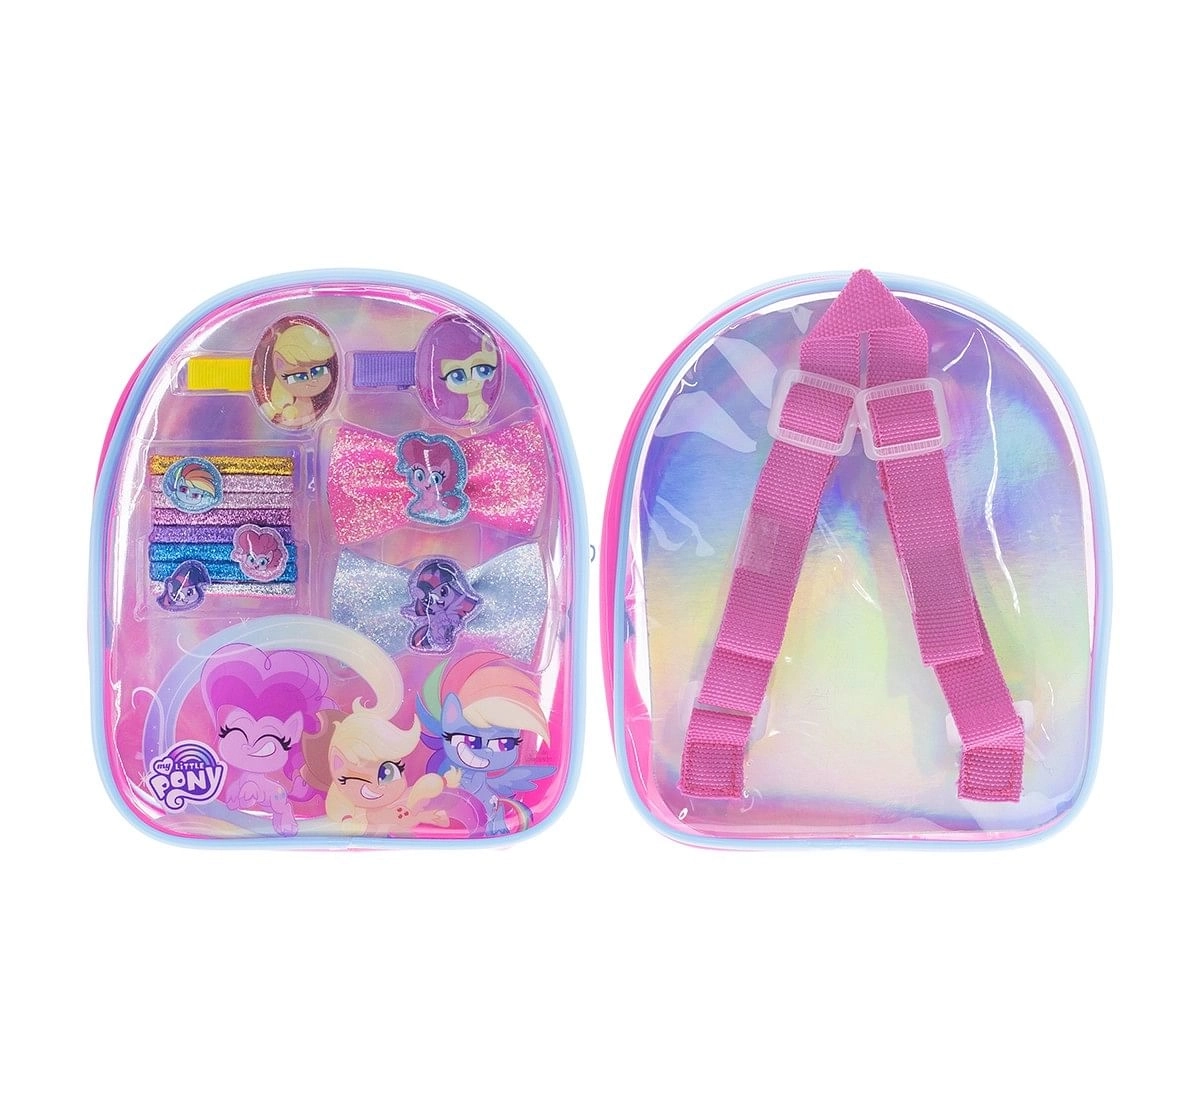 Townley Girl My Little Pony Hair Accessories Gift Bag Toileteries and Makeup for age 3Y+ 